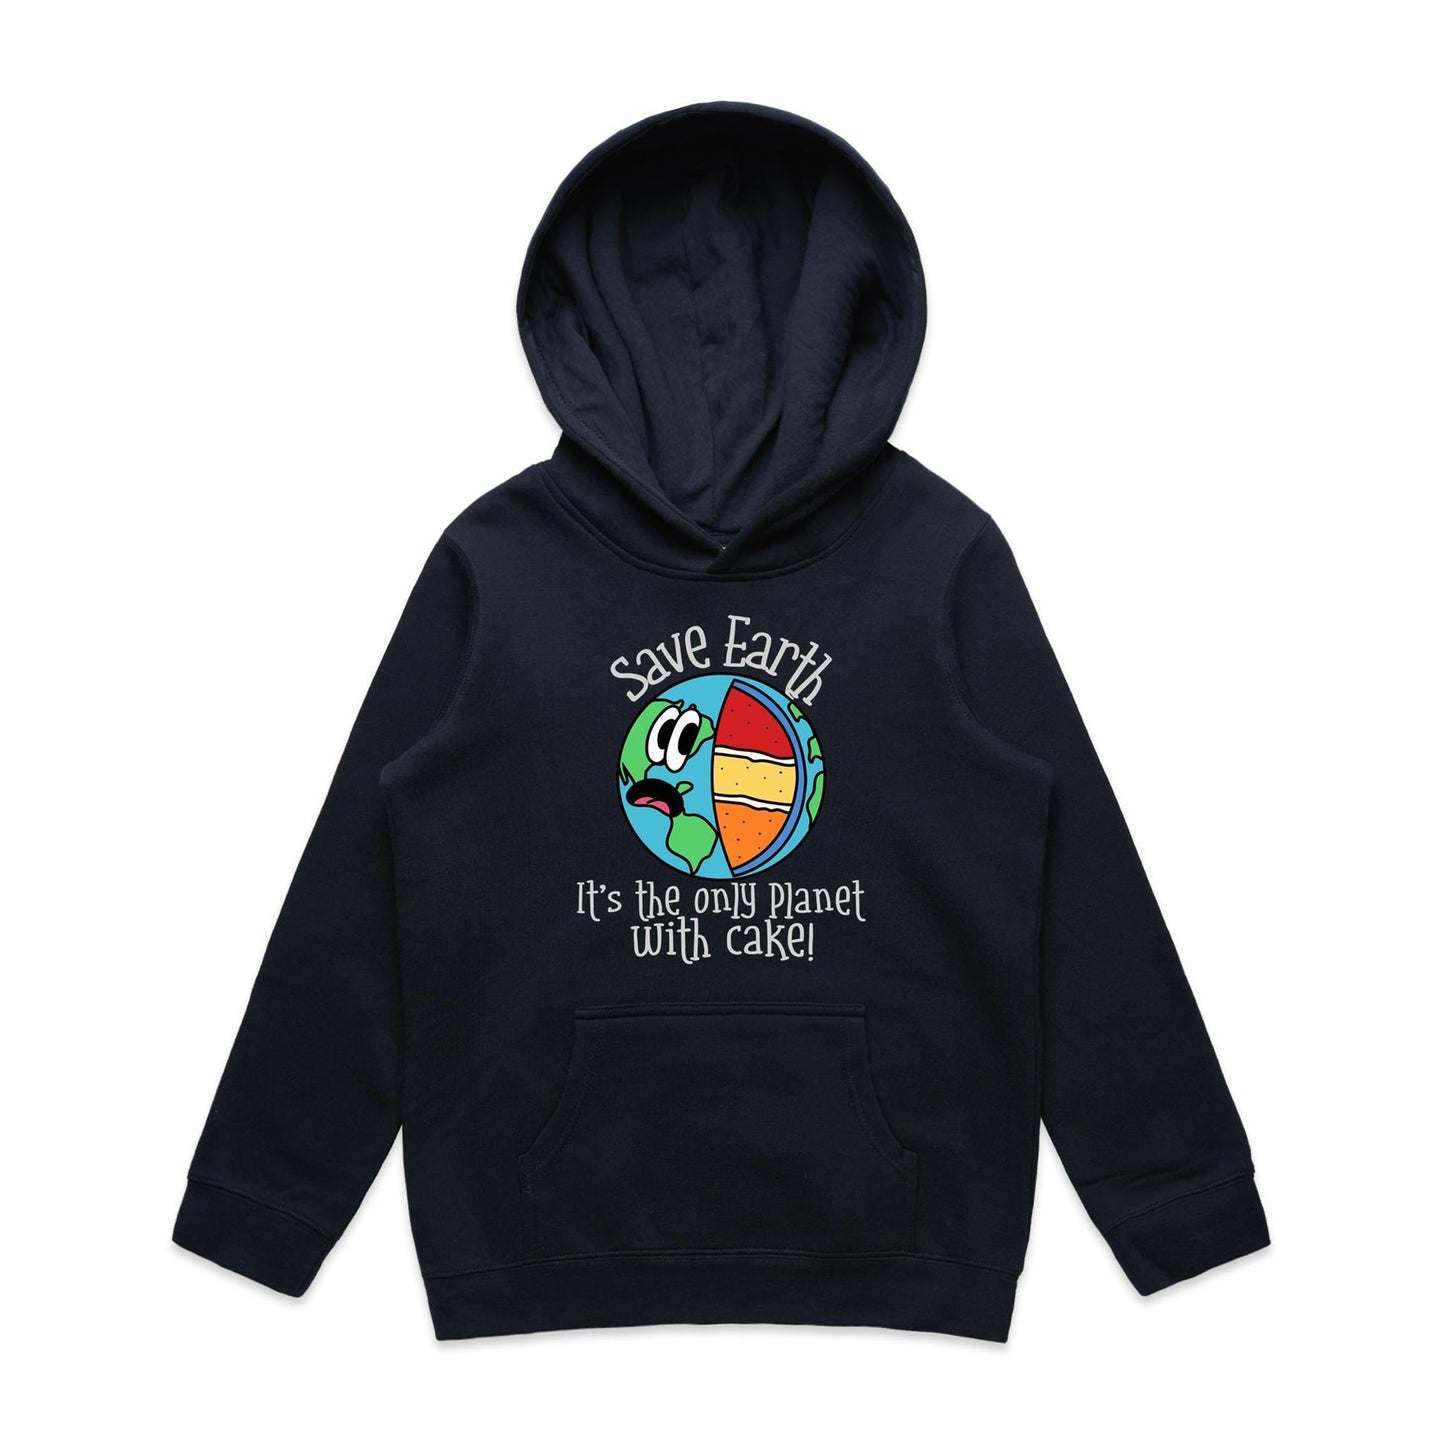 Save Earth, It's The Only Planet With Cake - Youth Supply Hood Navy Kids Hoodie